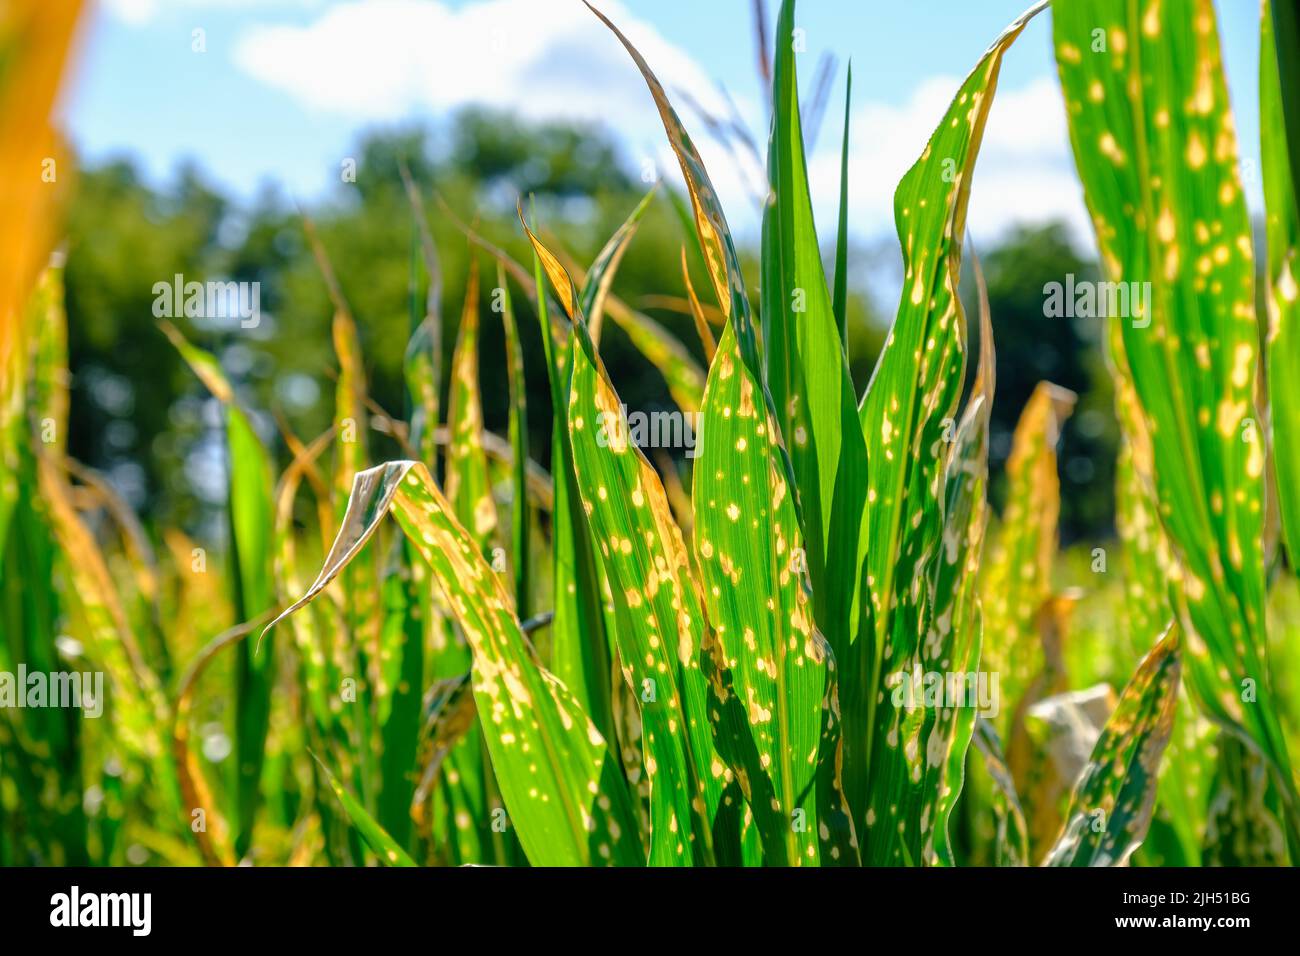 Corn plants wilting and dead after wrong applying herbicide in cornfield Stock Photo